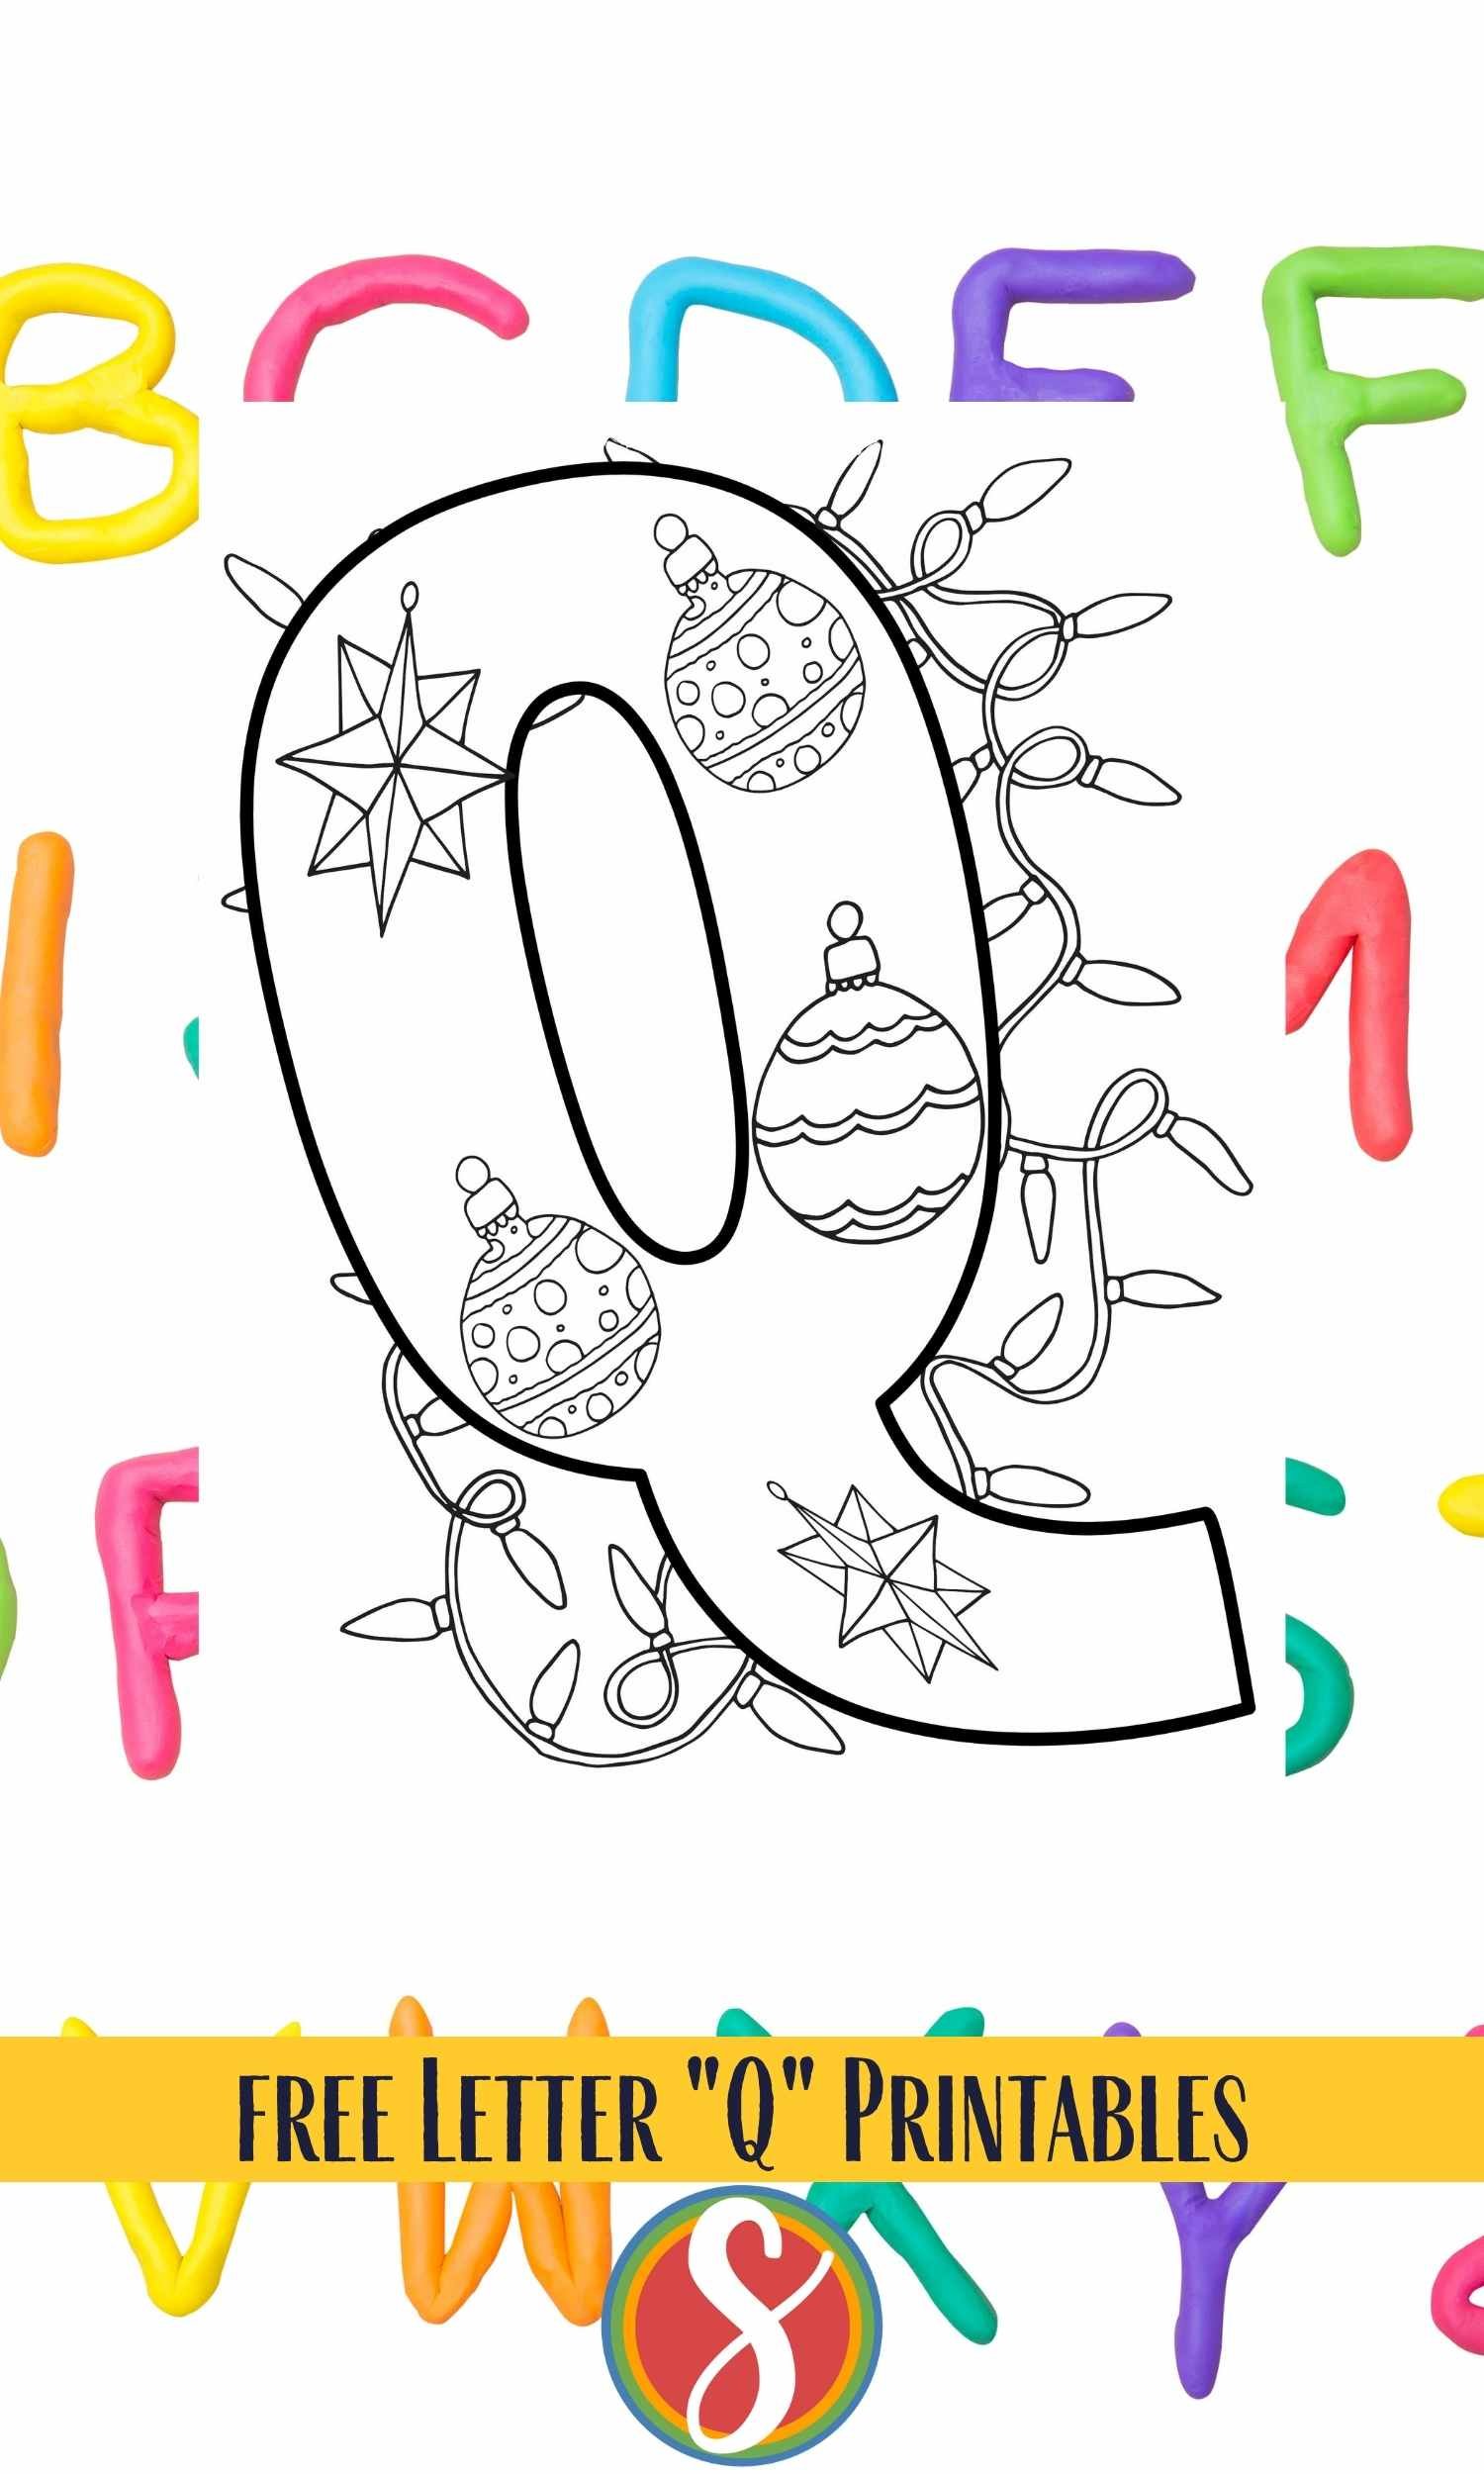 Letter Q outline with christmas ornaments inside and christmas lights surrounding